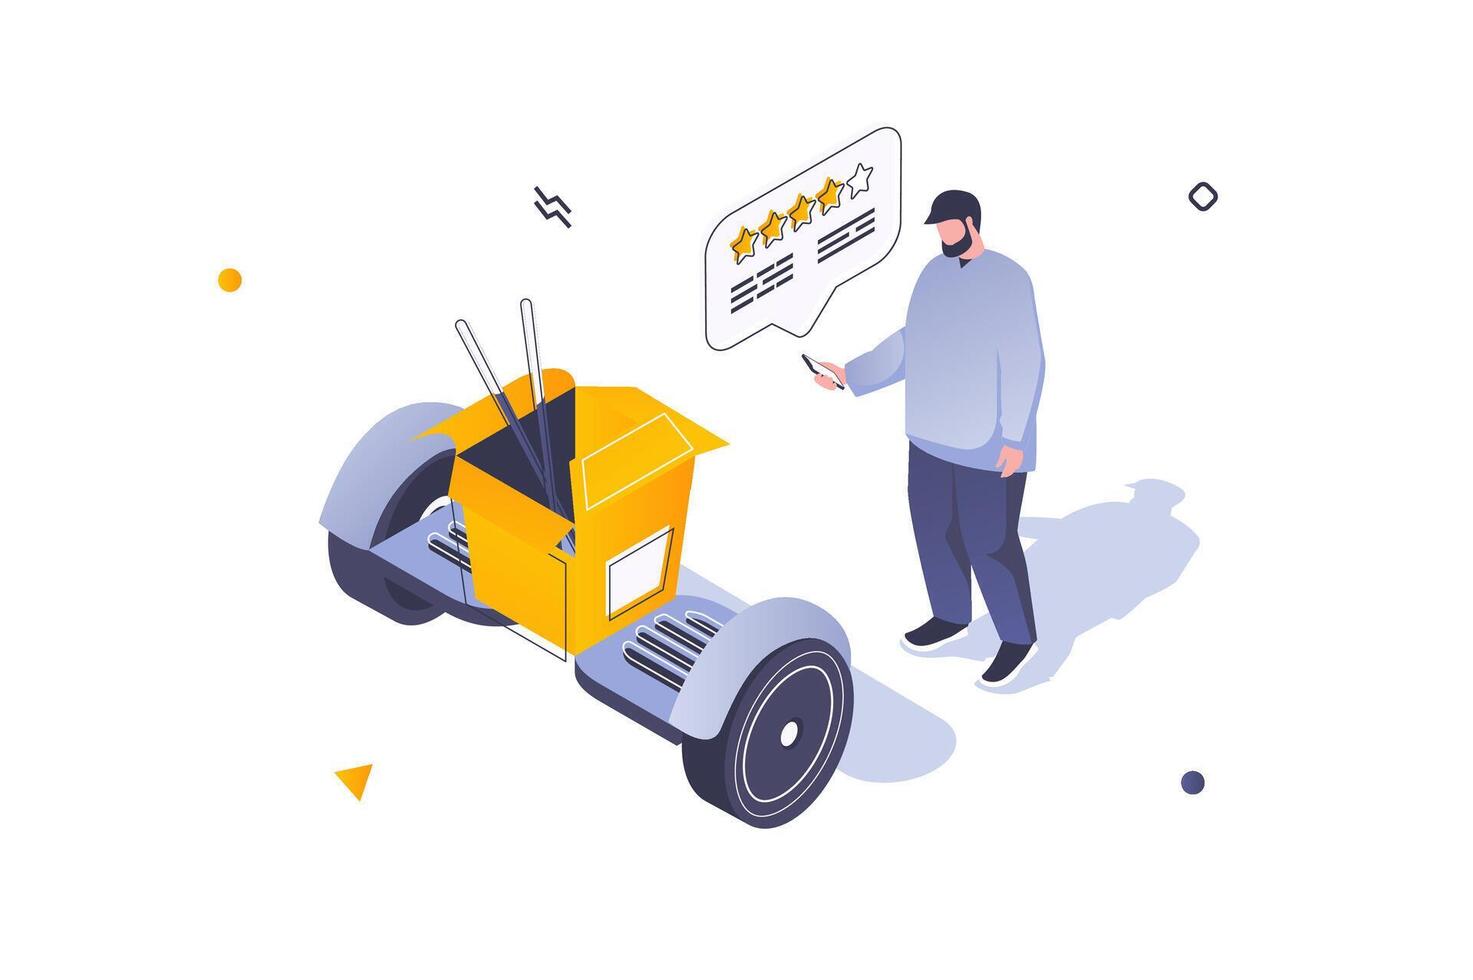 Food delivery concept in 3d isometric design. Man making order with take away meal box and using express shipping by courier hoverboard. Vector illustration with isometric people scene for web graphic